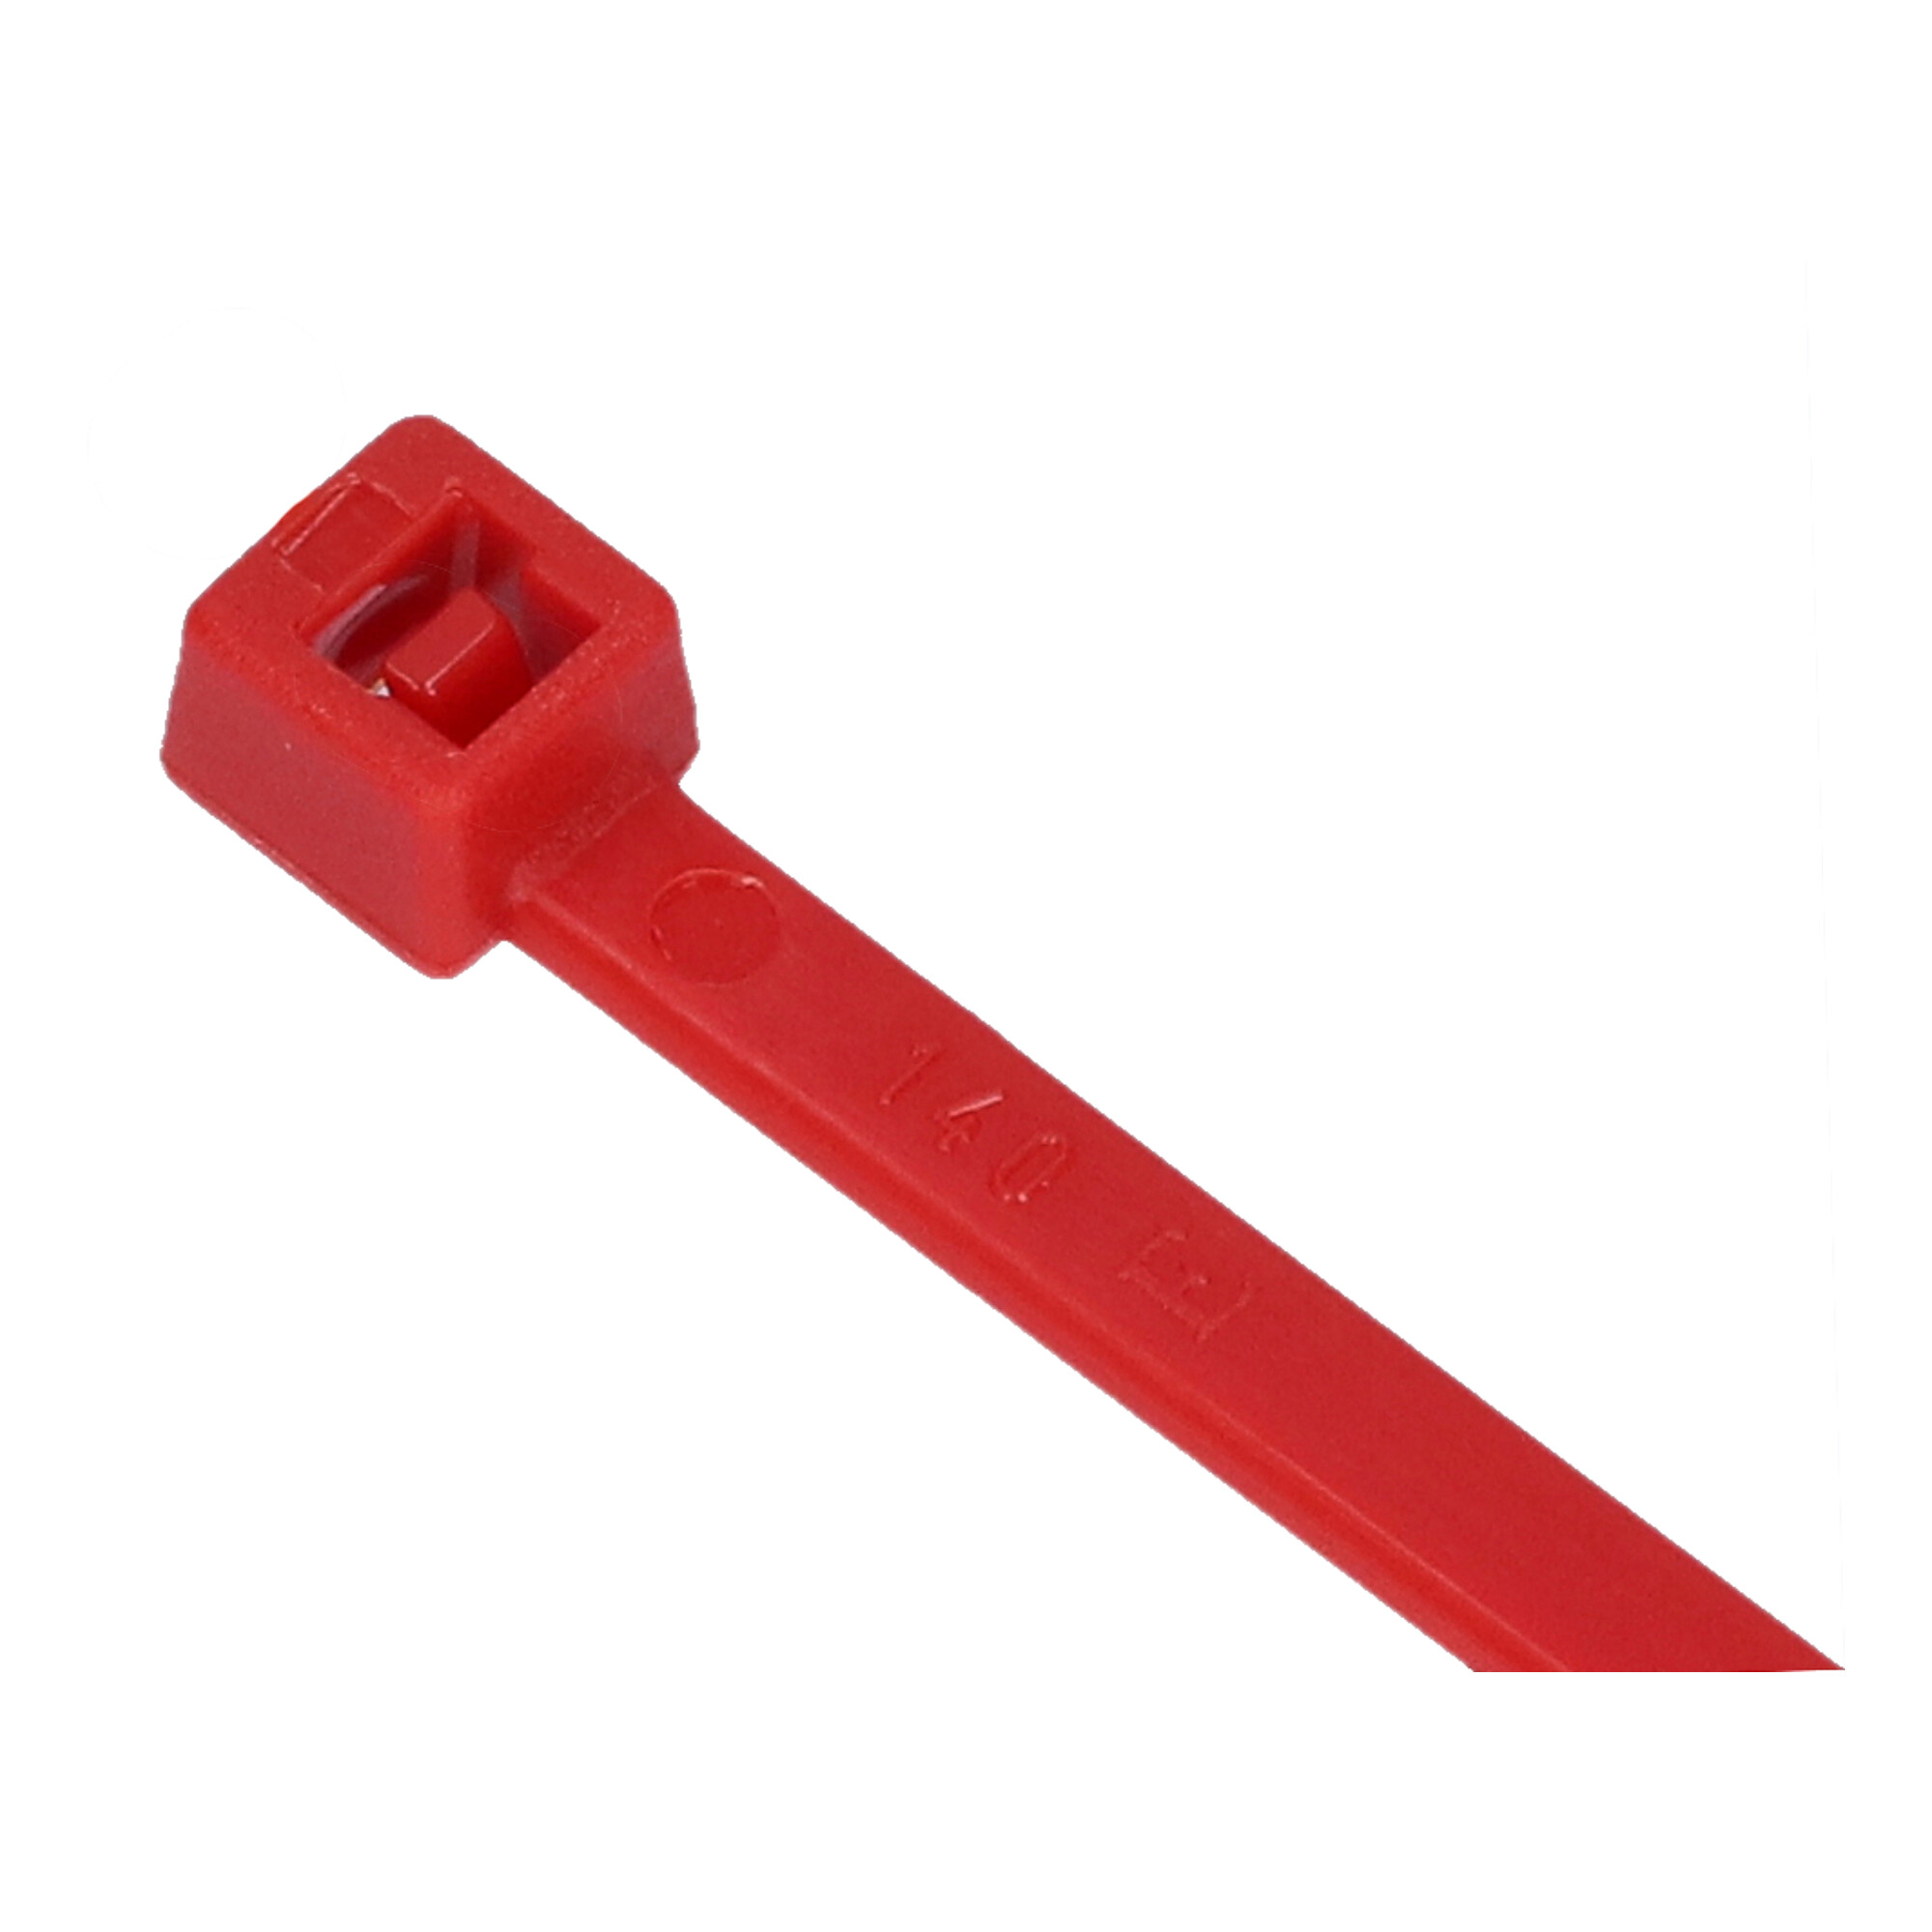 95-0200-035-RE Cable tie PA series